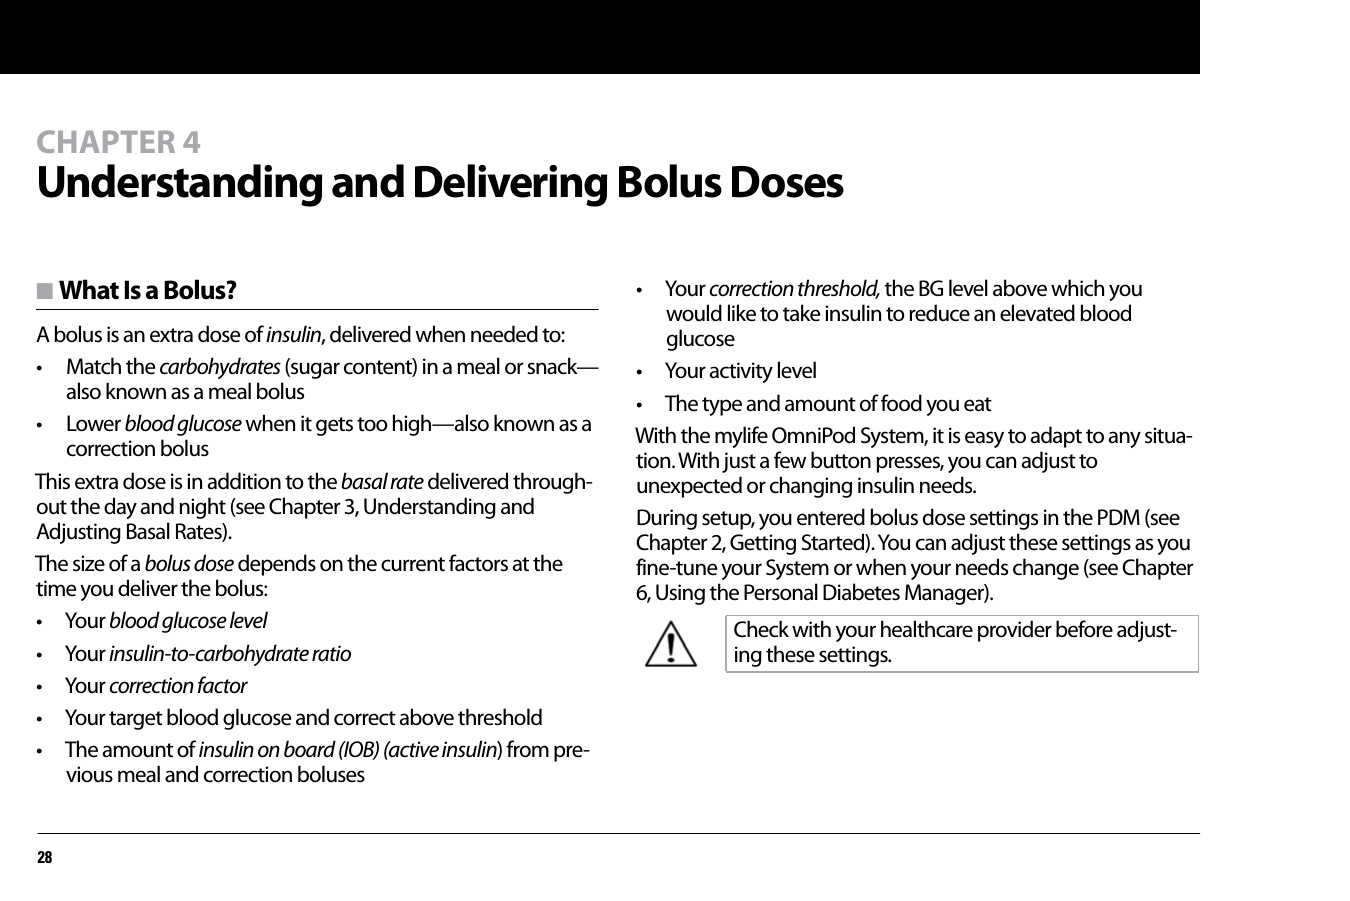 28CHAPTER 4Understanding and Delivering Bolus Dosesn What Is a Bolus?A bolus is an extra dose of insulin, delivered when needed to: • Match the carbohydrates (sugar content) in a meal or snack—also known as a meal bolus• Lower blood glucose when it gets too high—also known as a correction bolusThis extra dose is in addition to the basal rate delivered through-out the day and night (see Chapter 3, Understanding and Adjusting Basal Rates).The size of a bolus dose depends on the current factors at the time you deliver the bolus:• Your blood glucose level• Your insulin-to-carbohydrate ratio• Your correction factor• Your target blood glucose and correct above threshold• The amount of insulin on board (IOB) (active insulin) from pre-vious meal and correction boluses• Your correction threshold, the BG level above which you would like to take insulin to reduce an elevated blood glucose • Your activity level• The type and amount of food you eatWith the mylife OmniPod System, it is easy to adapt to any situa-tion. With just a few button presses, you can adjust to unexpected or changing insulin needs.During setup, you entered bolus dose settings in the PDM (see Chapter 2, Getting Started). You can adjust these settings as you fine-tune your System or when your needs change (see Chapter 6, Using the Personal Diabetes Manager).Check with your healthcare provider before adjust-ing these settings.